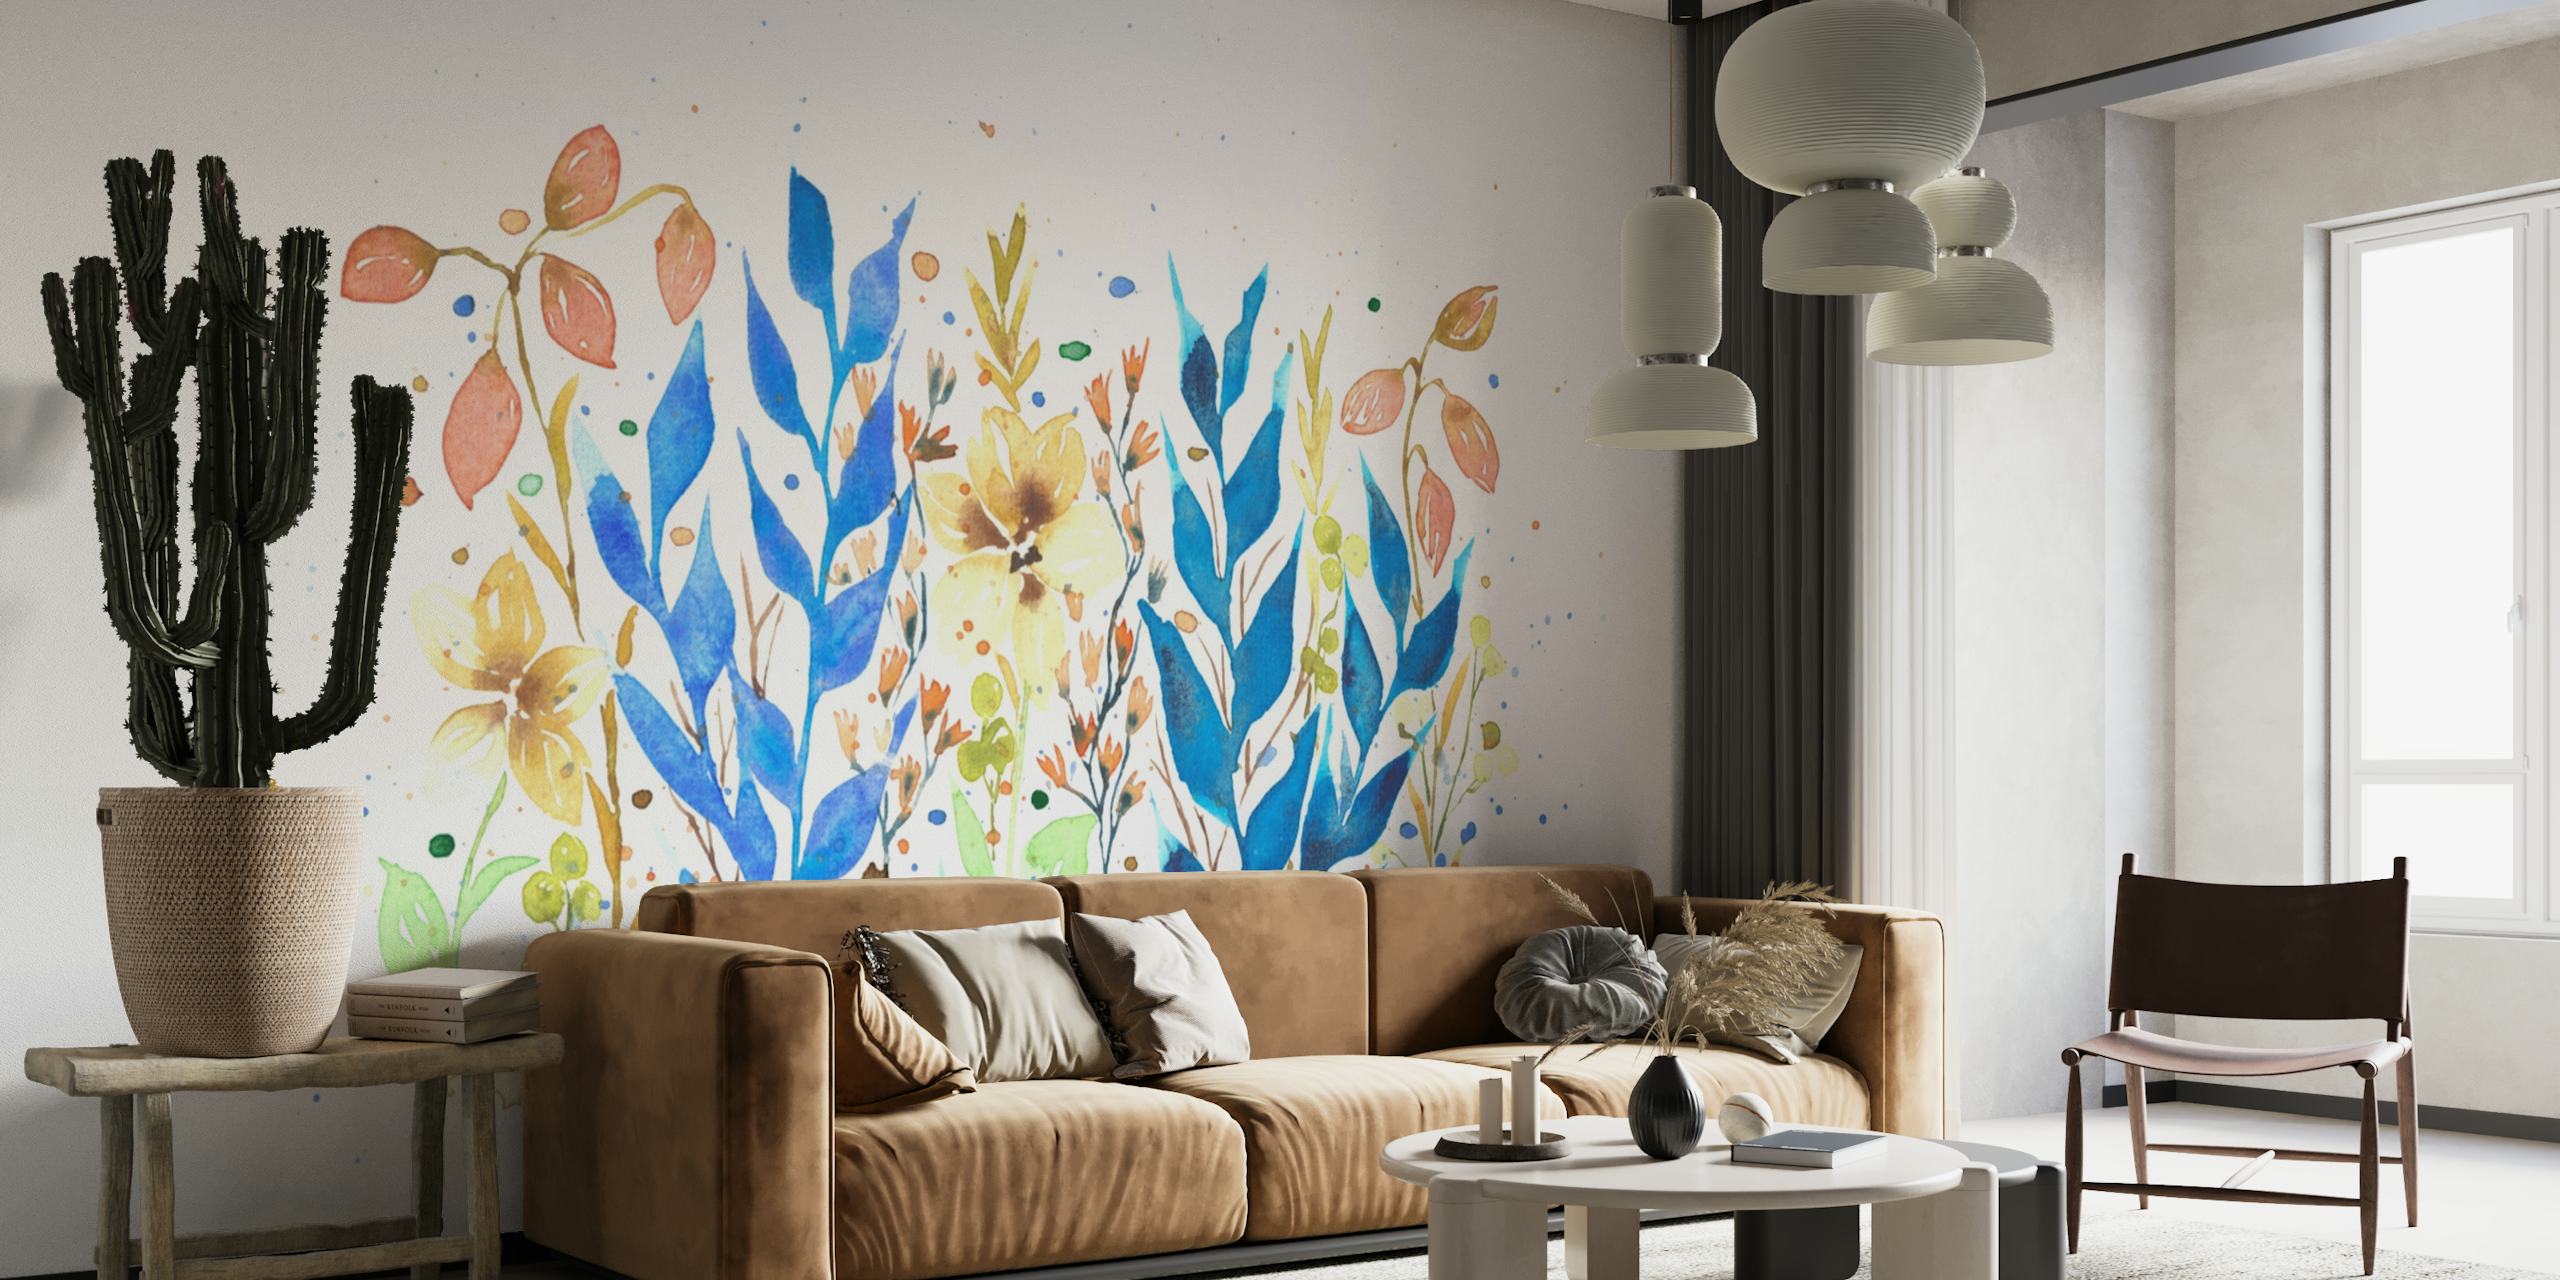 Watercolor painting of blue and golden flowers with green foliage on a wall mural